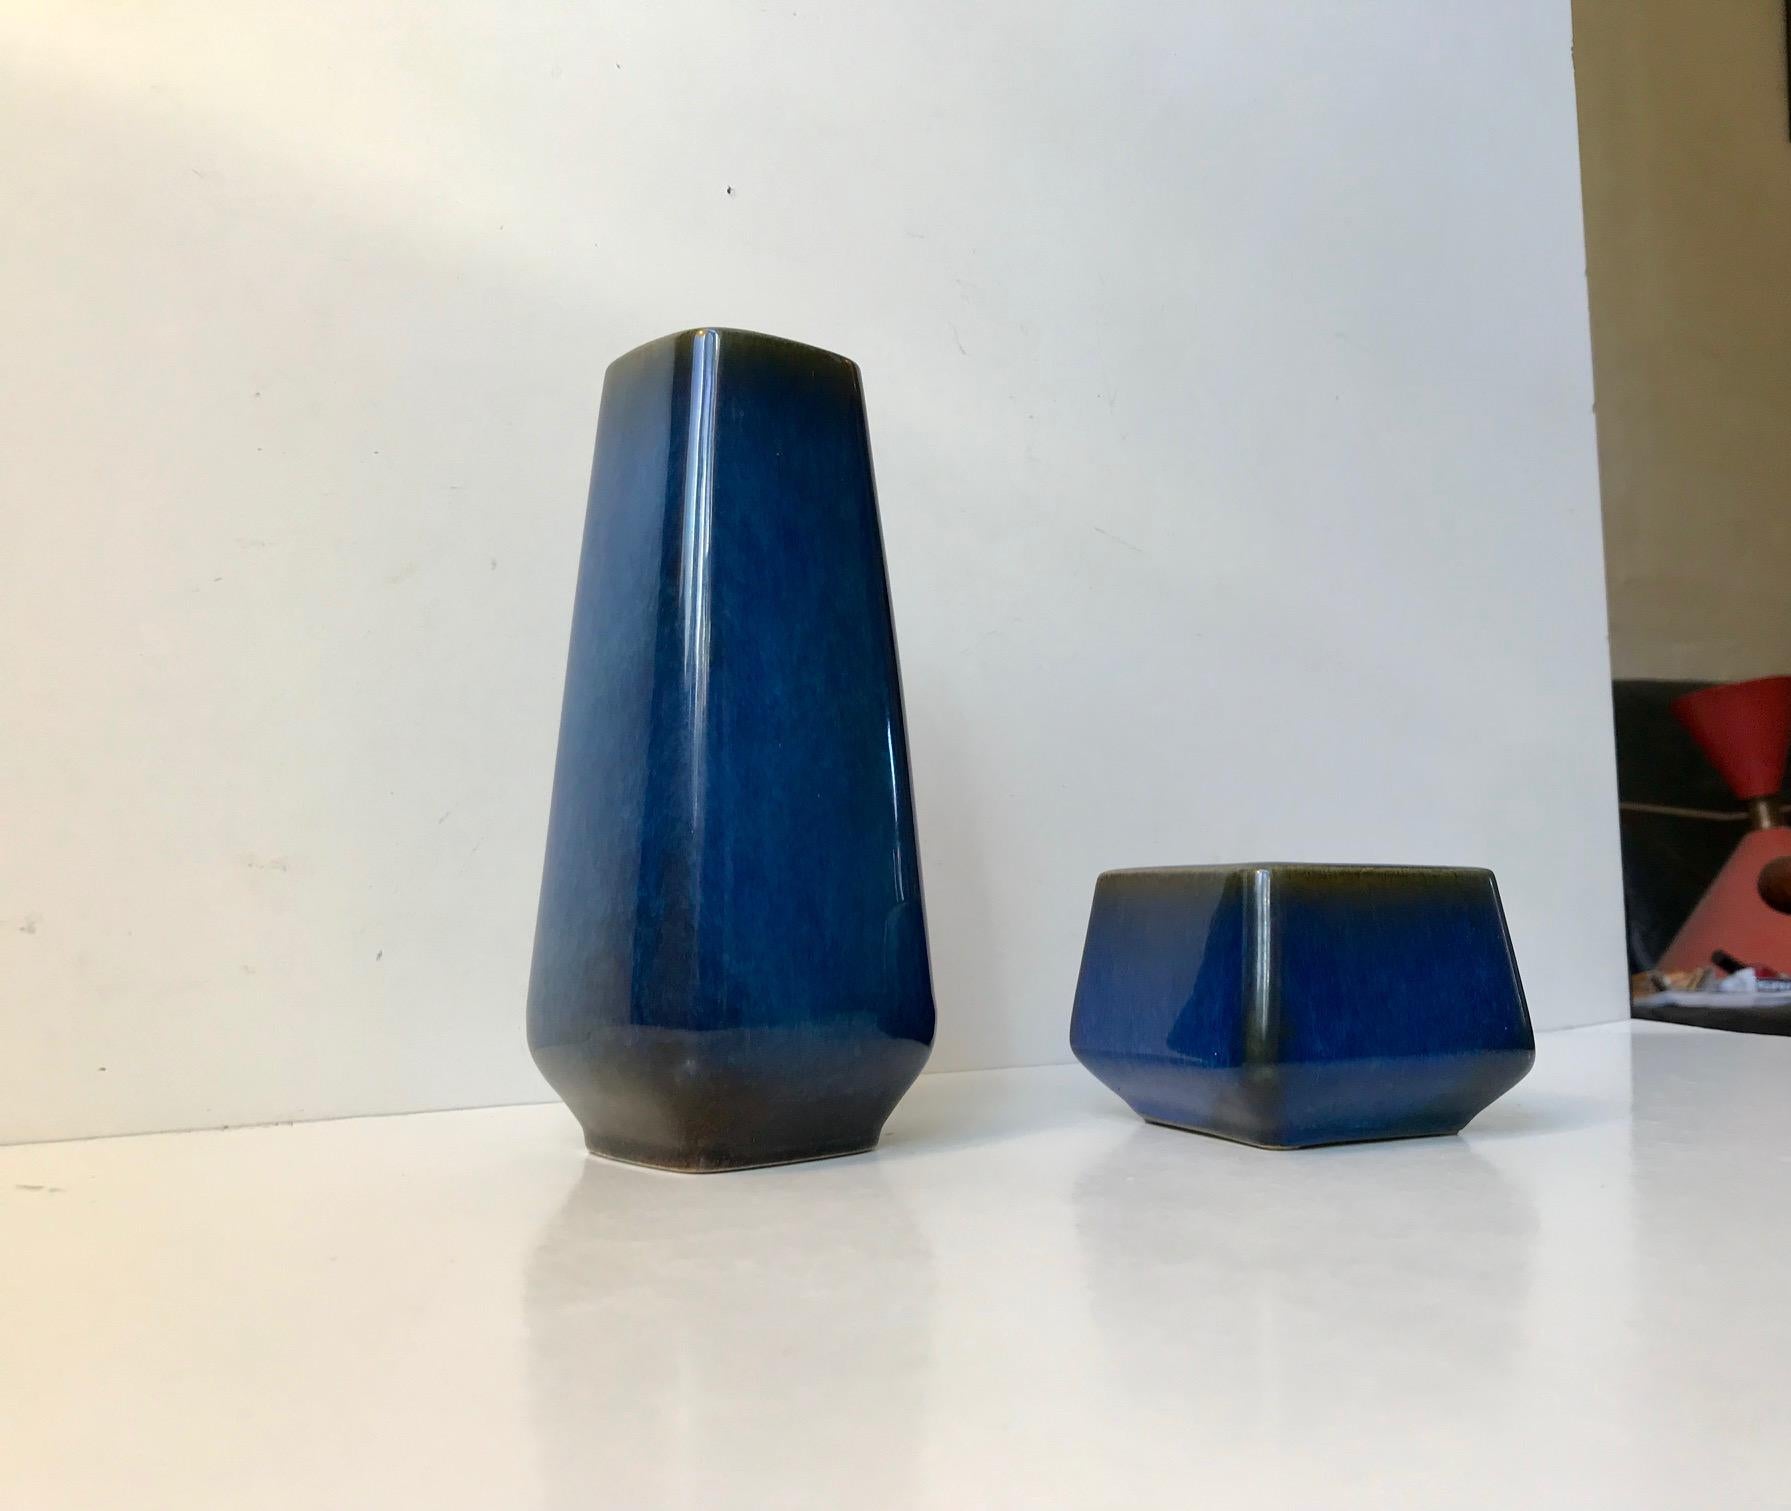 - A matching set of Laguna vases by Sven Jonson
- Manufactured by Gustavsberg in Sweden during the 1960s 
- These ceramic pieces features blue and earthy haresfur type glazes
- Both vases are marked beneath their bases.